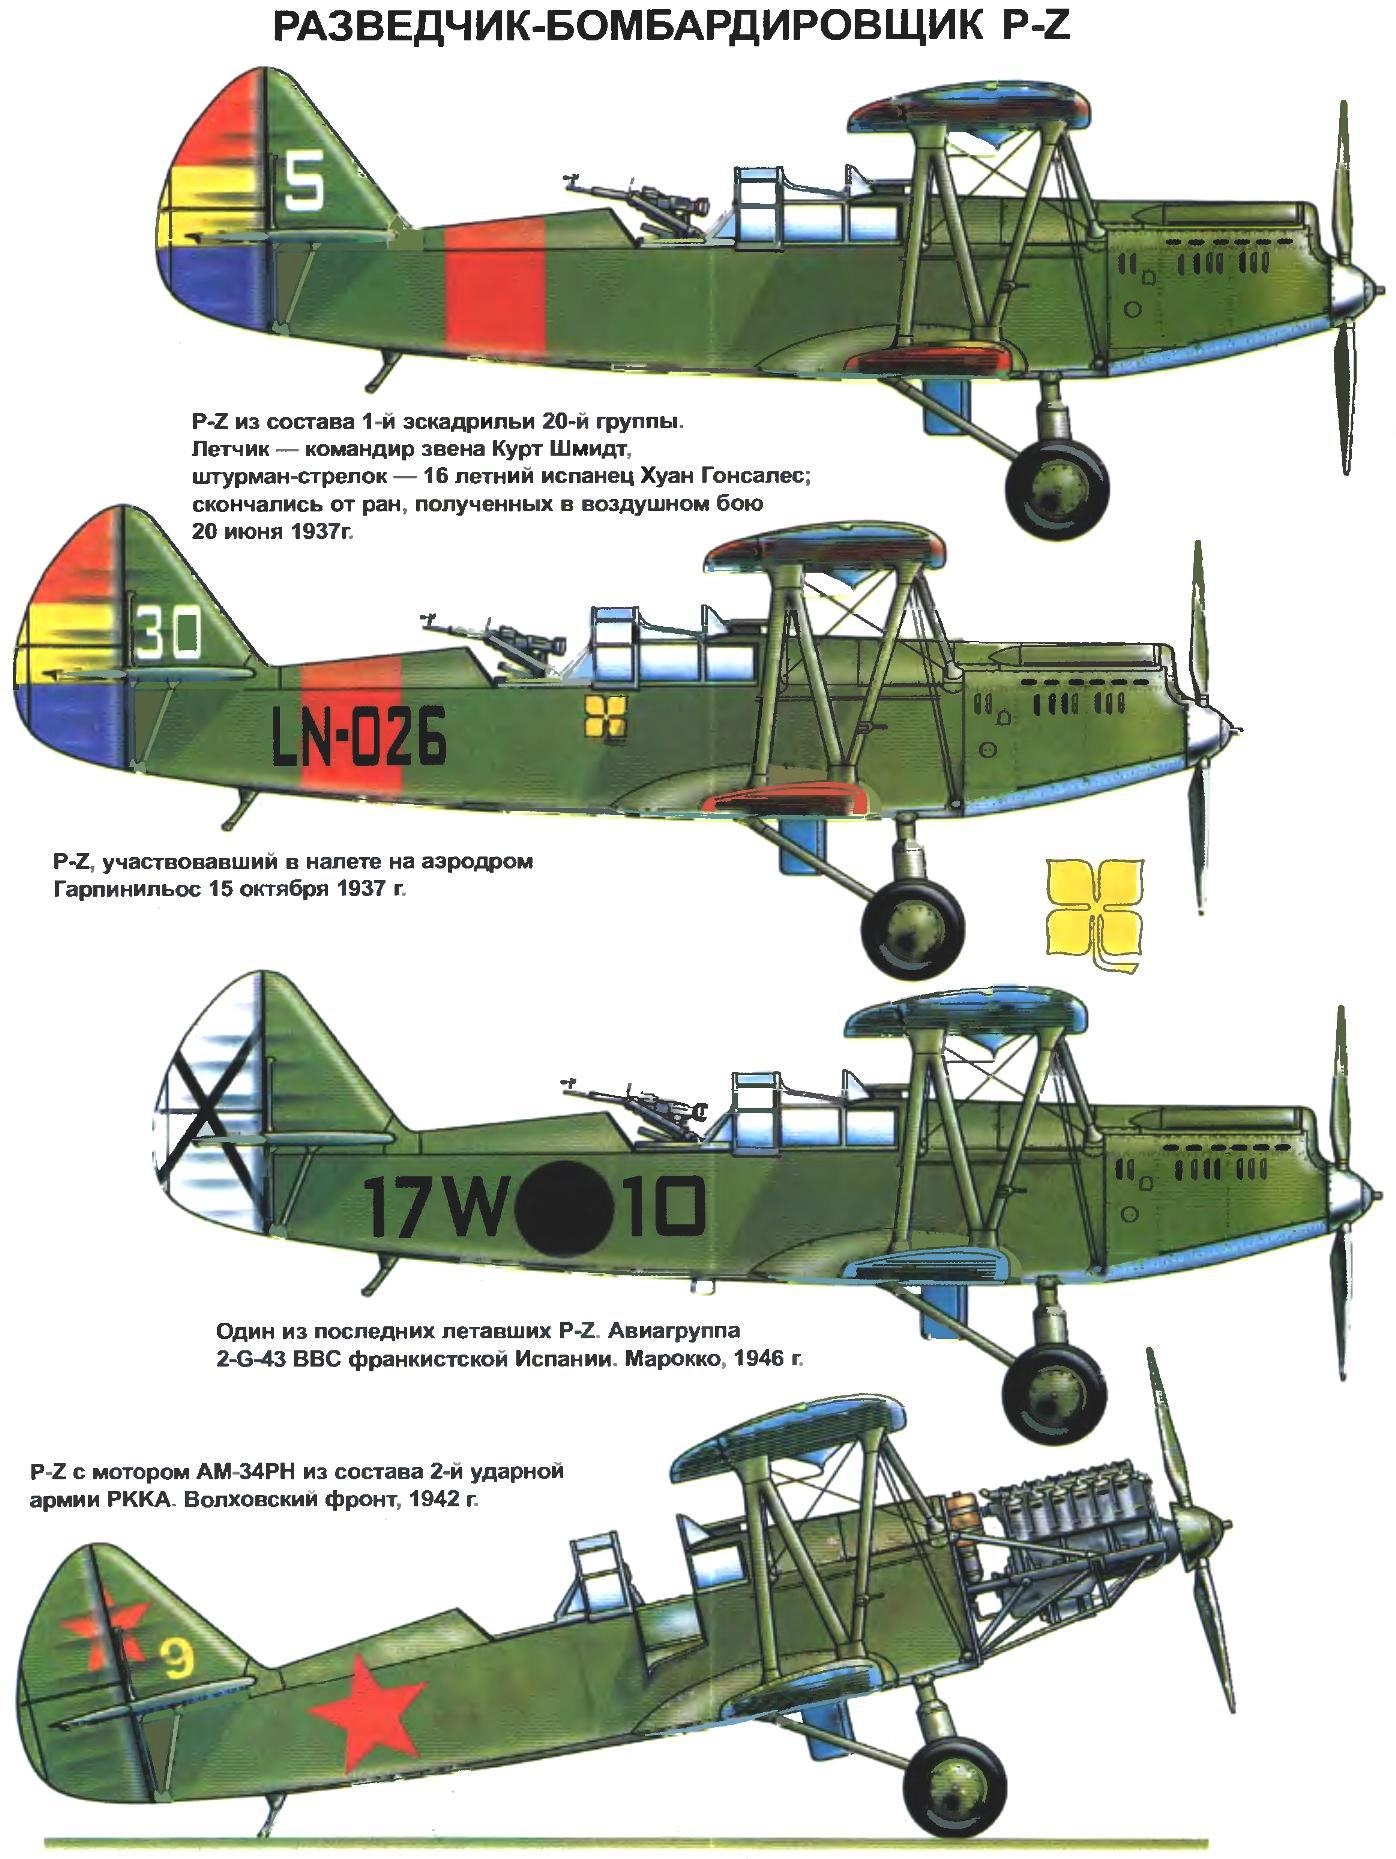 THE LAST BIPLANE COUNTRY OF THE SOVIETS